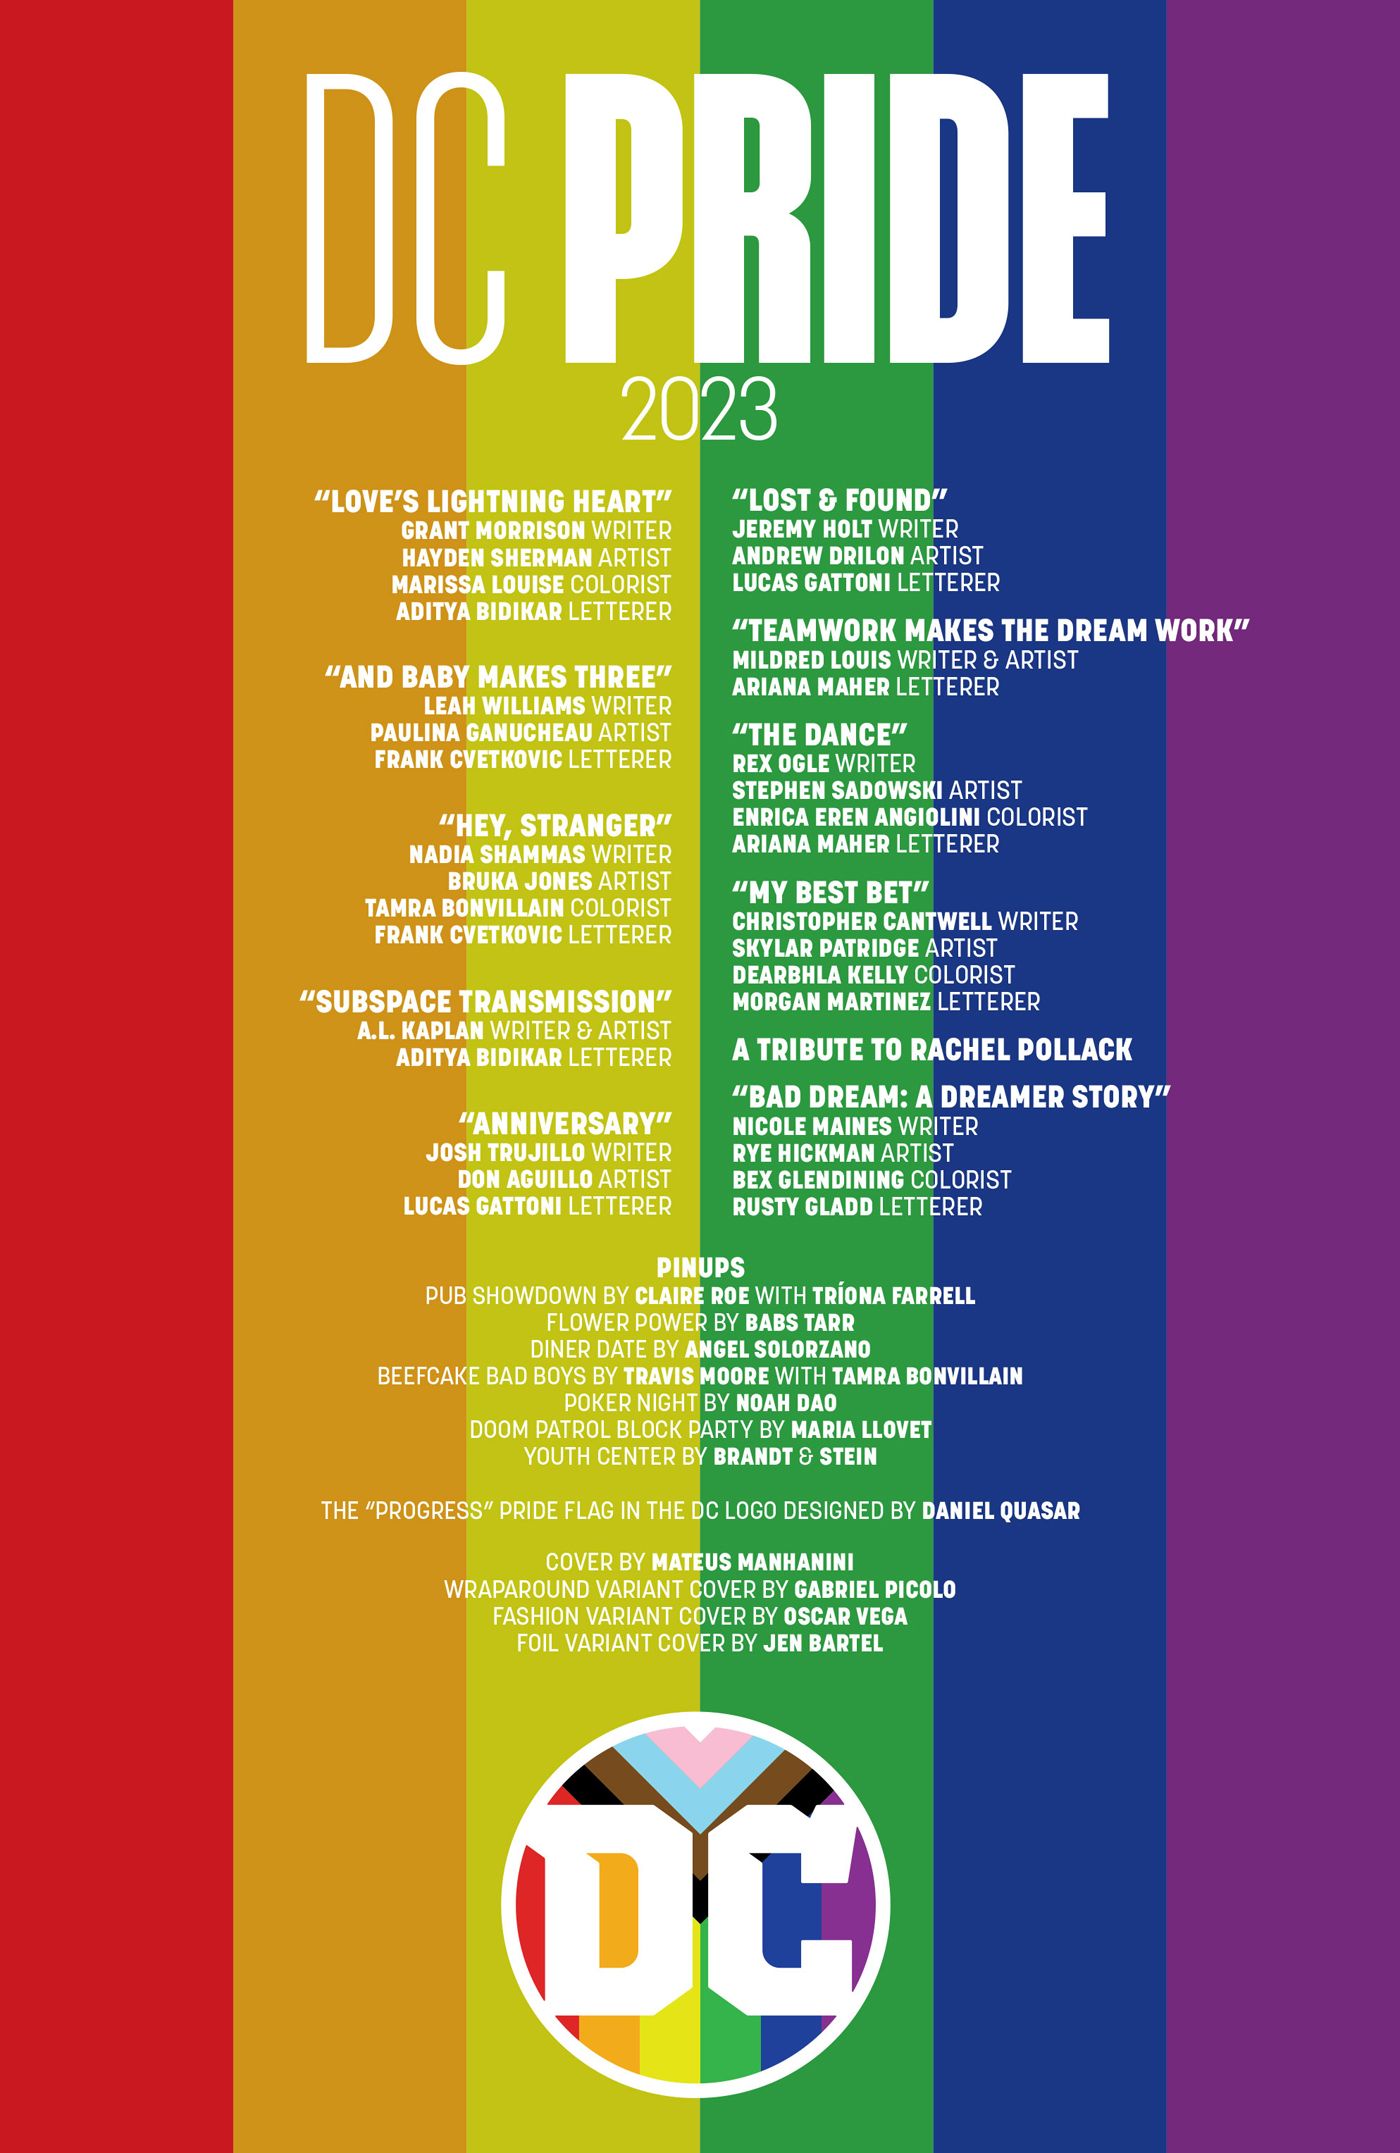 An early look at DC Pride 2023 #1 (2023) from DC Comics.